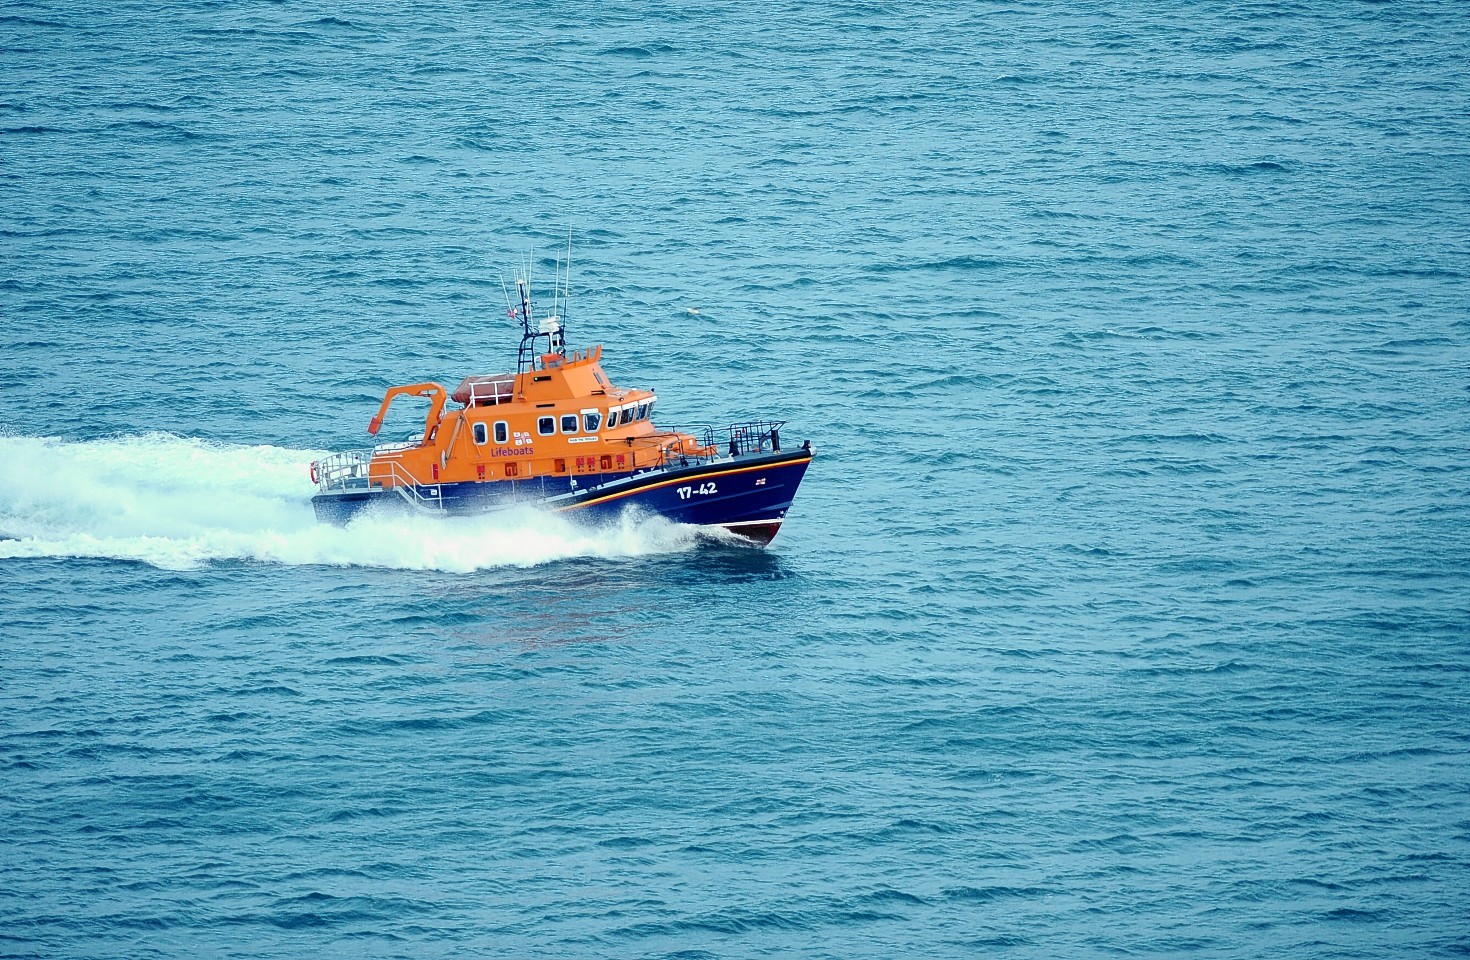 Thurso Lifeboat crew were called to the incident.